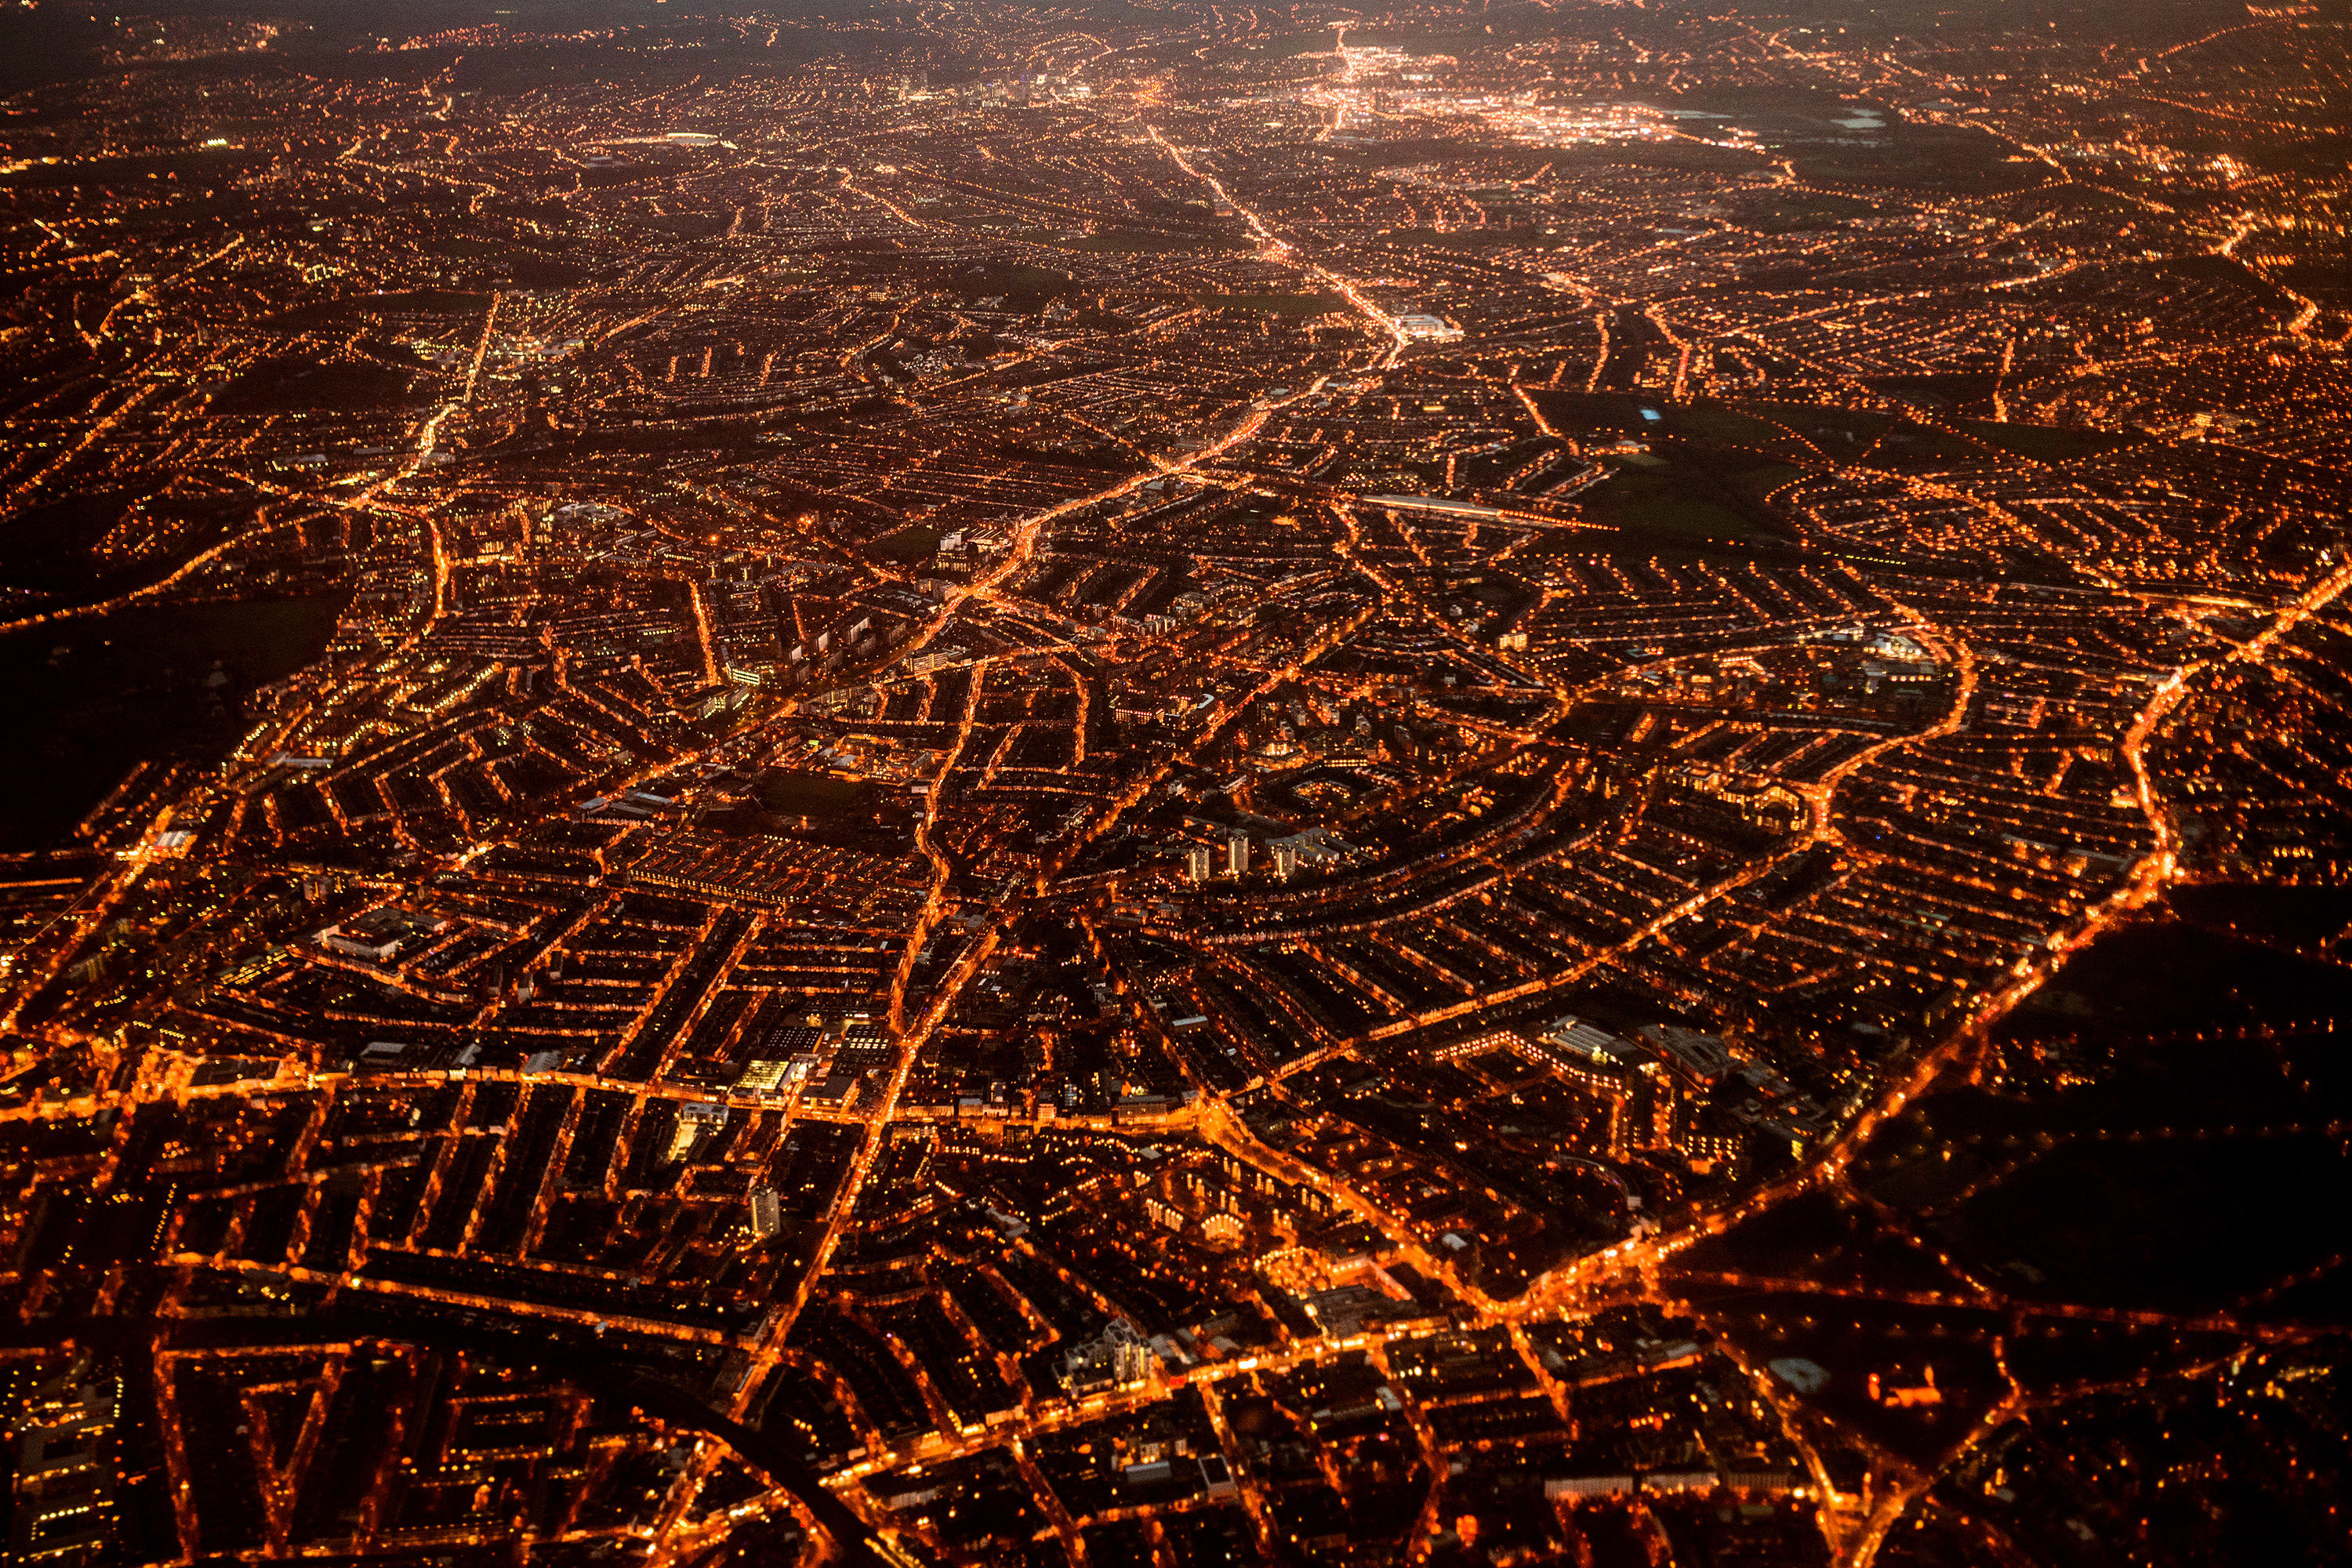 Lights of the City of London from above at night